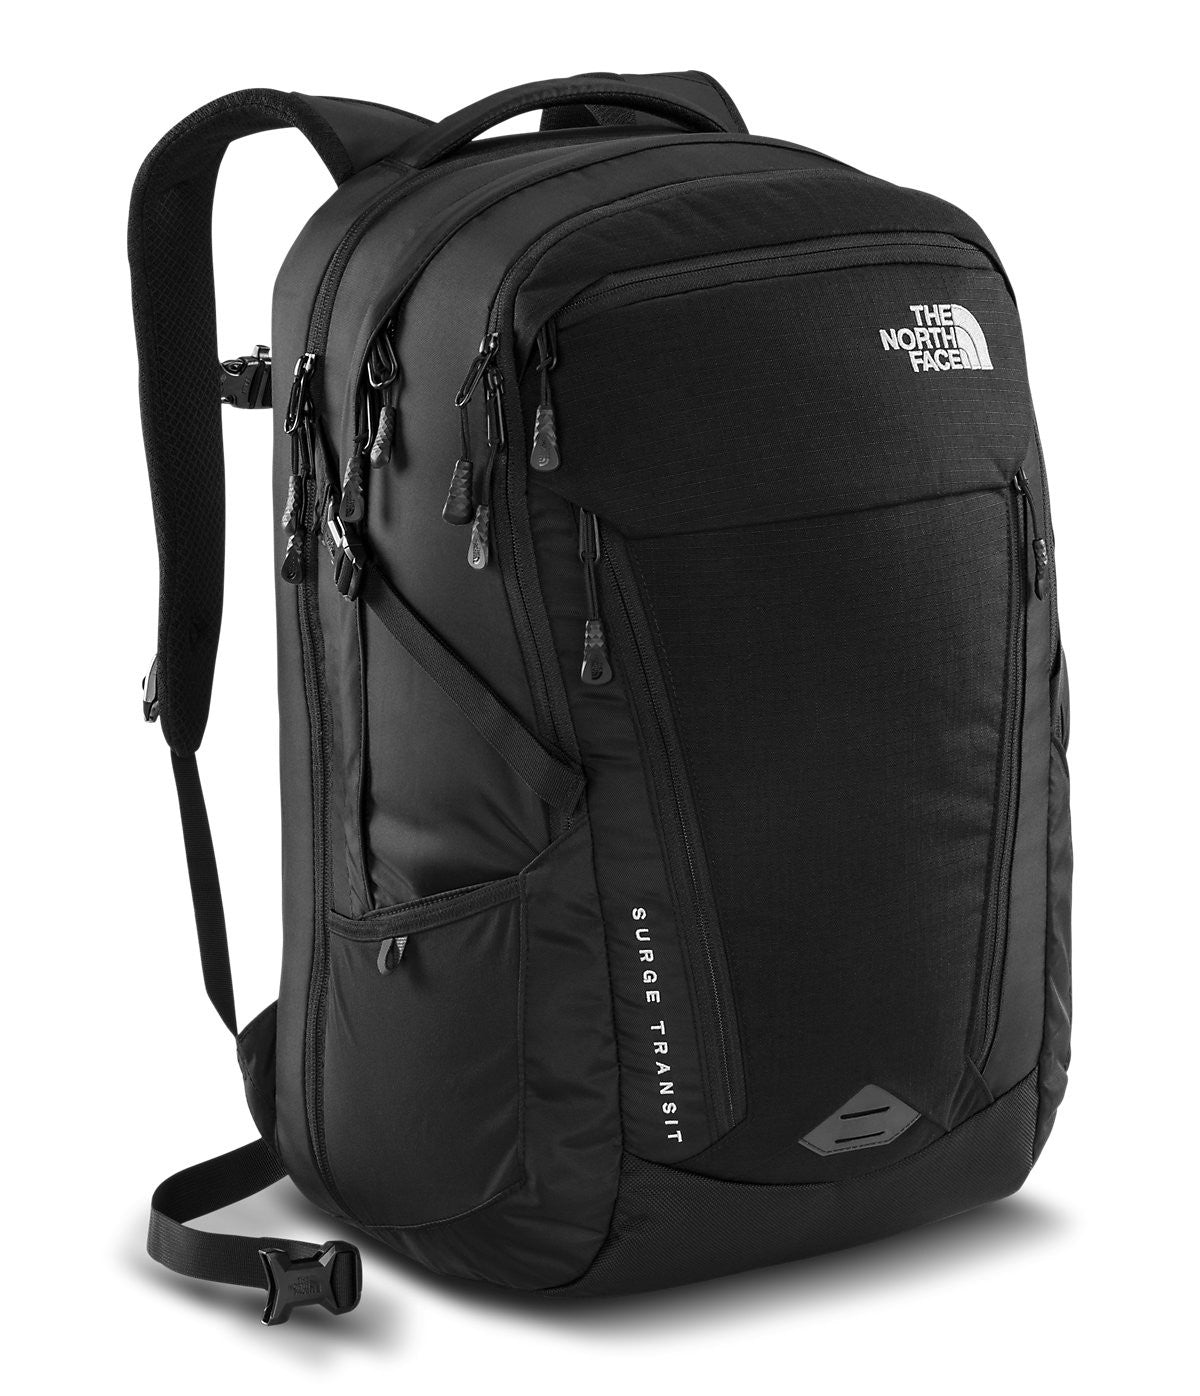 Best Selling Backpacks  Daypacks  The North Face